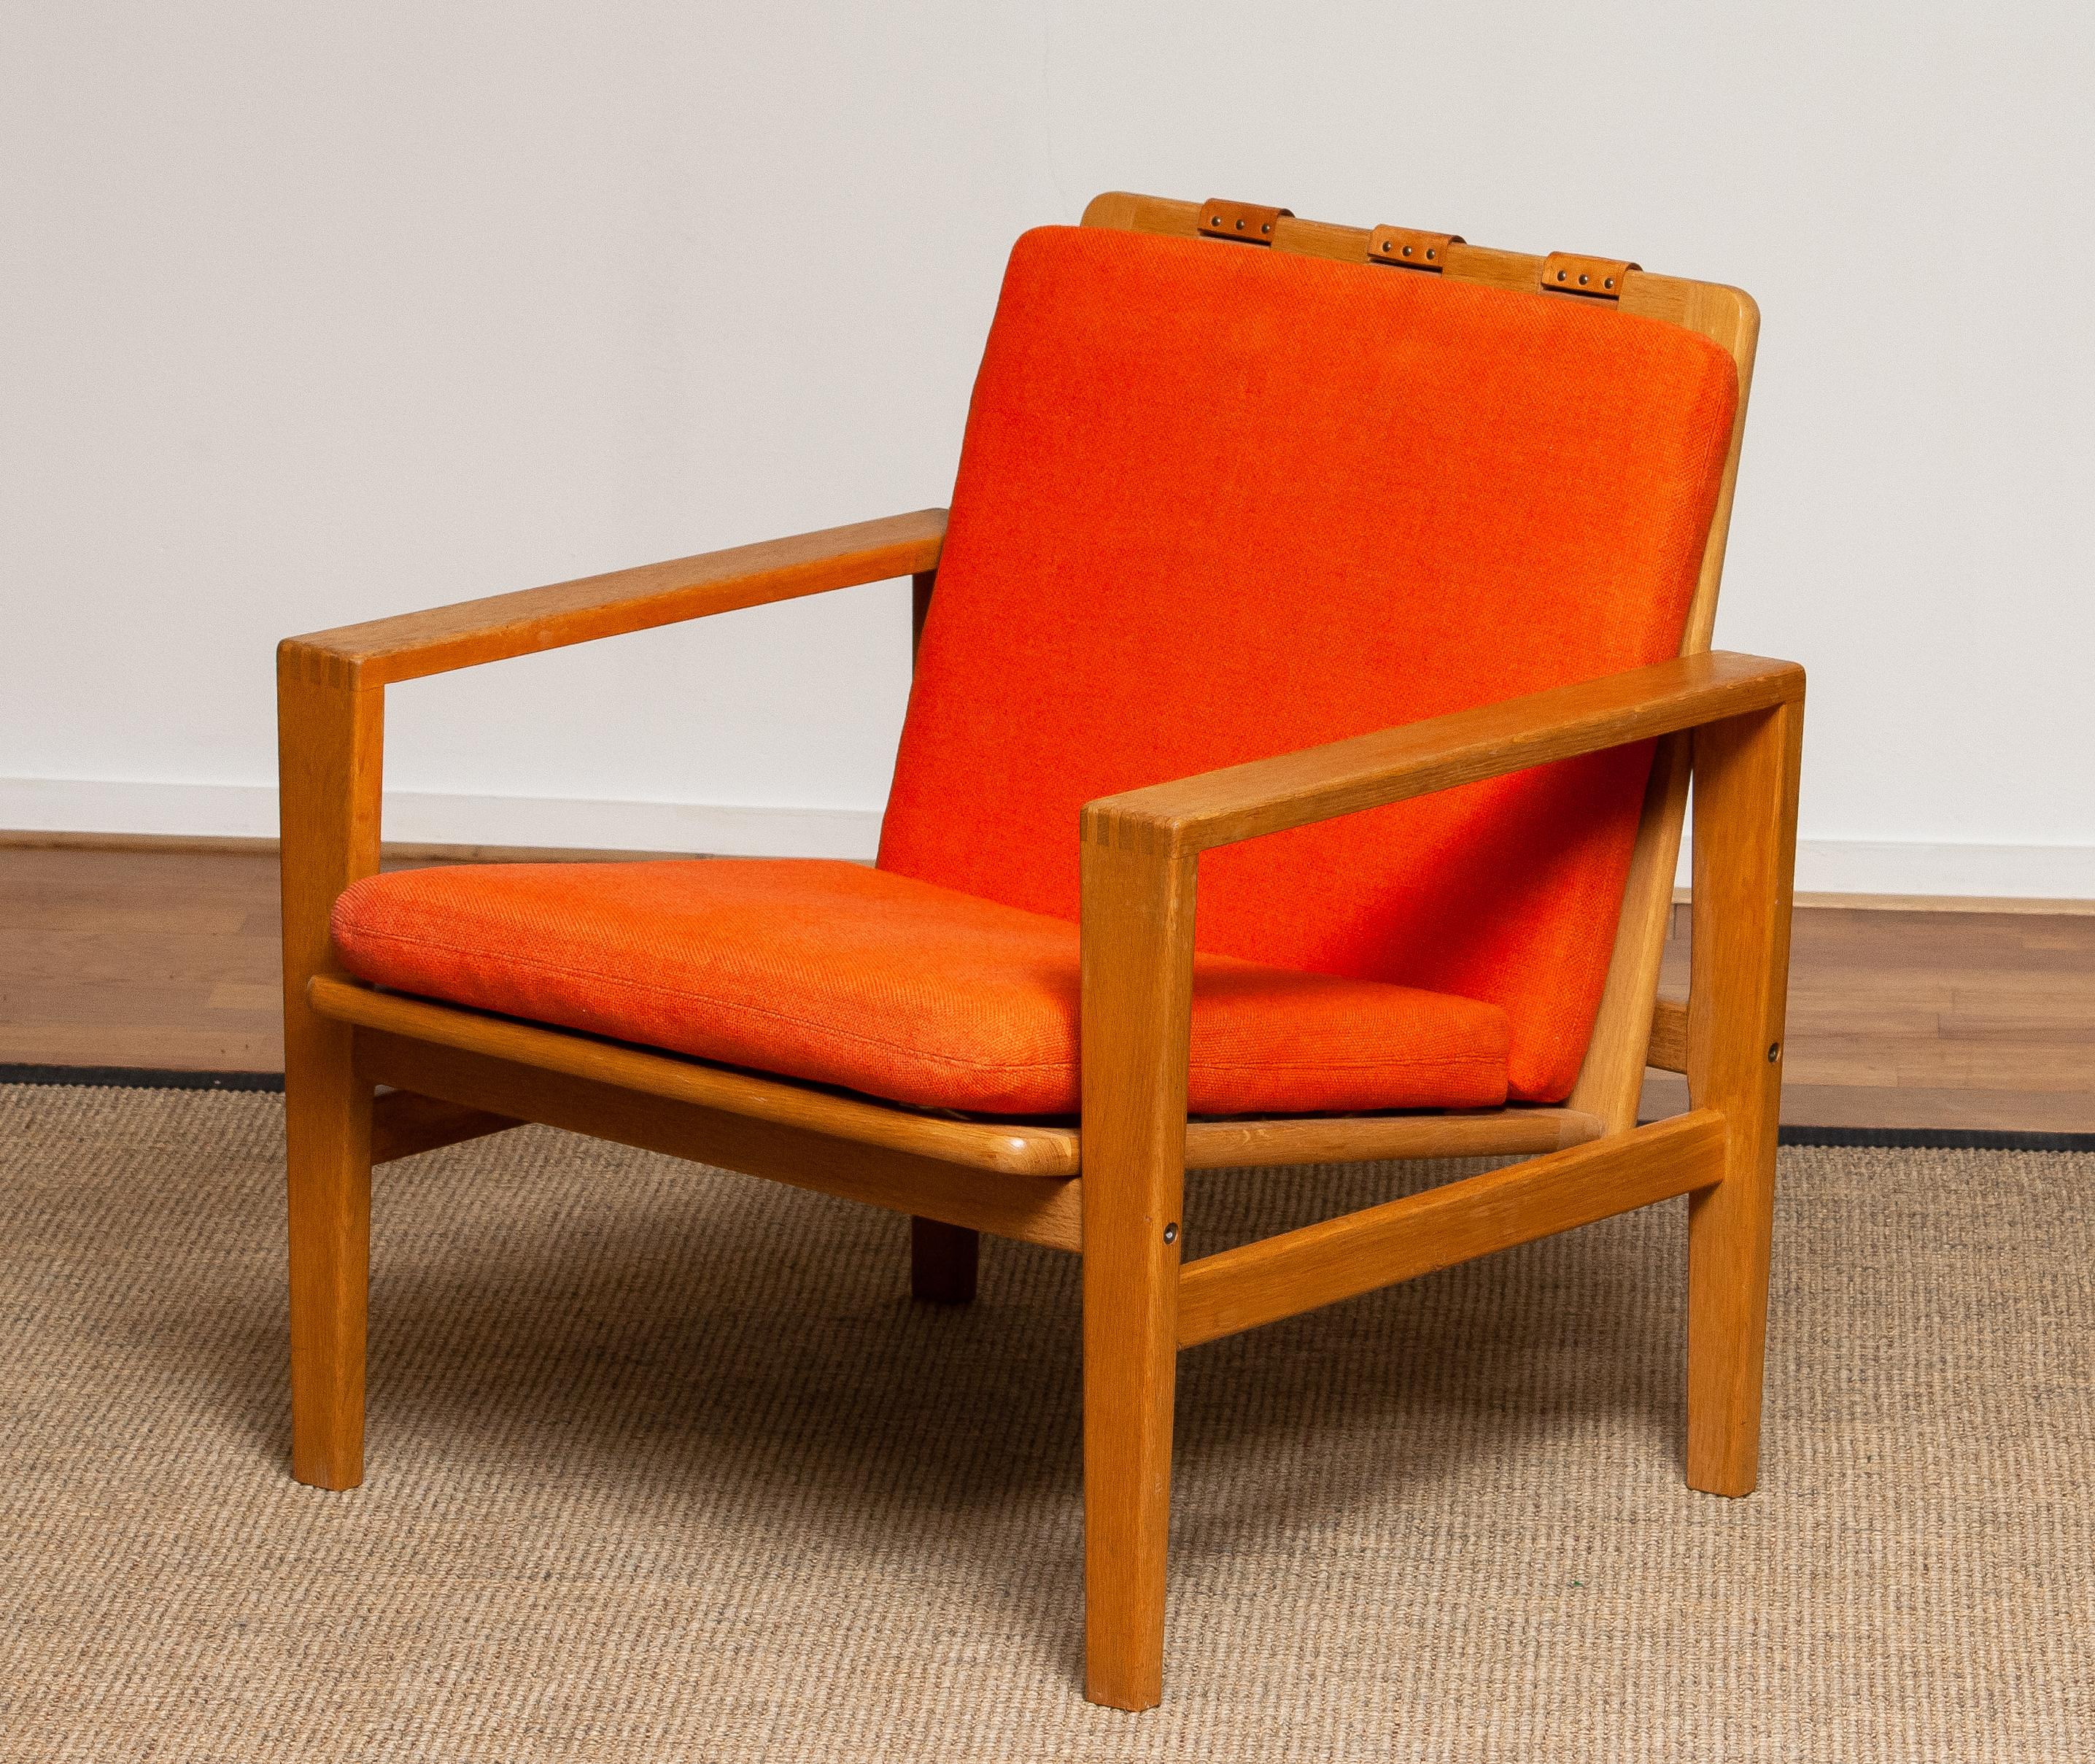 Comfortable Scandinavian lounge chair designed by Erik Merthen for Ire Skillingaryd, Sweden, 1960s.
The oak frame is in perfect condition as well as the leather belts who supports the backrest. The cushions have been newly filled.
The overall